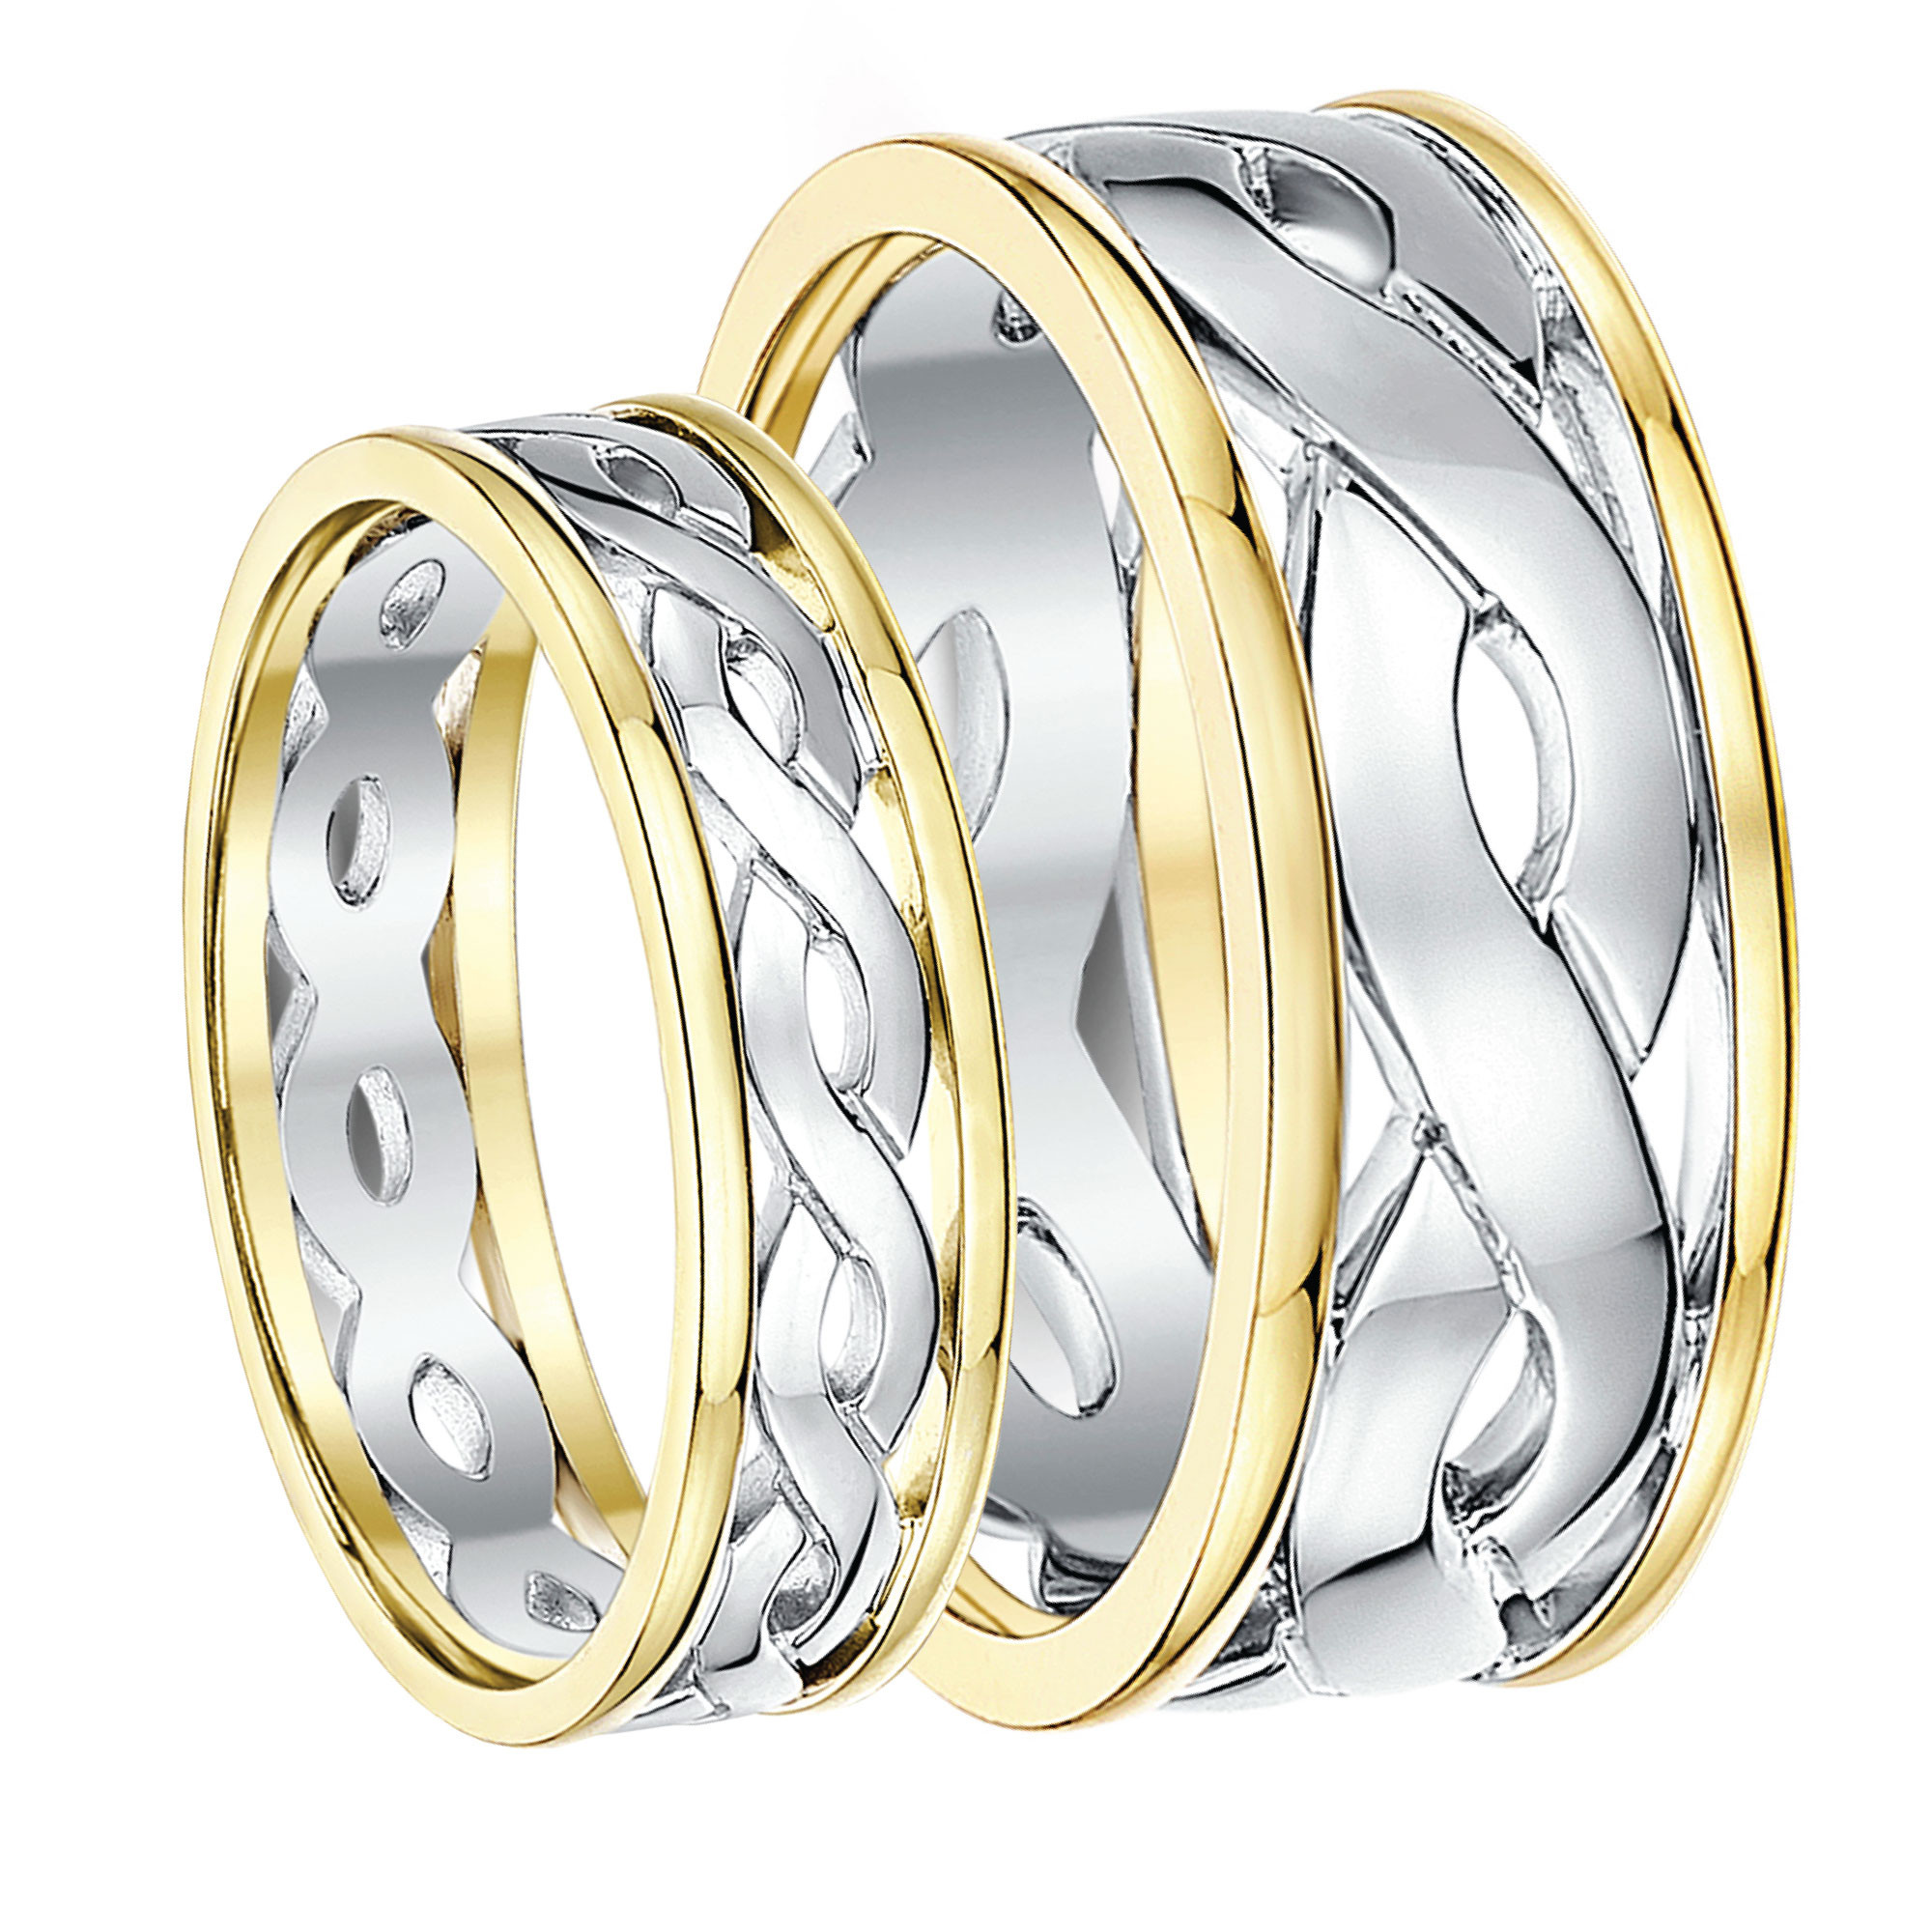 Pagan Wedding Rings
 His & Hers 5&7mm 9ct Gold Two Colour Celtic Wedding Rings